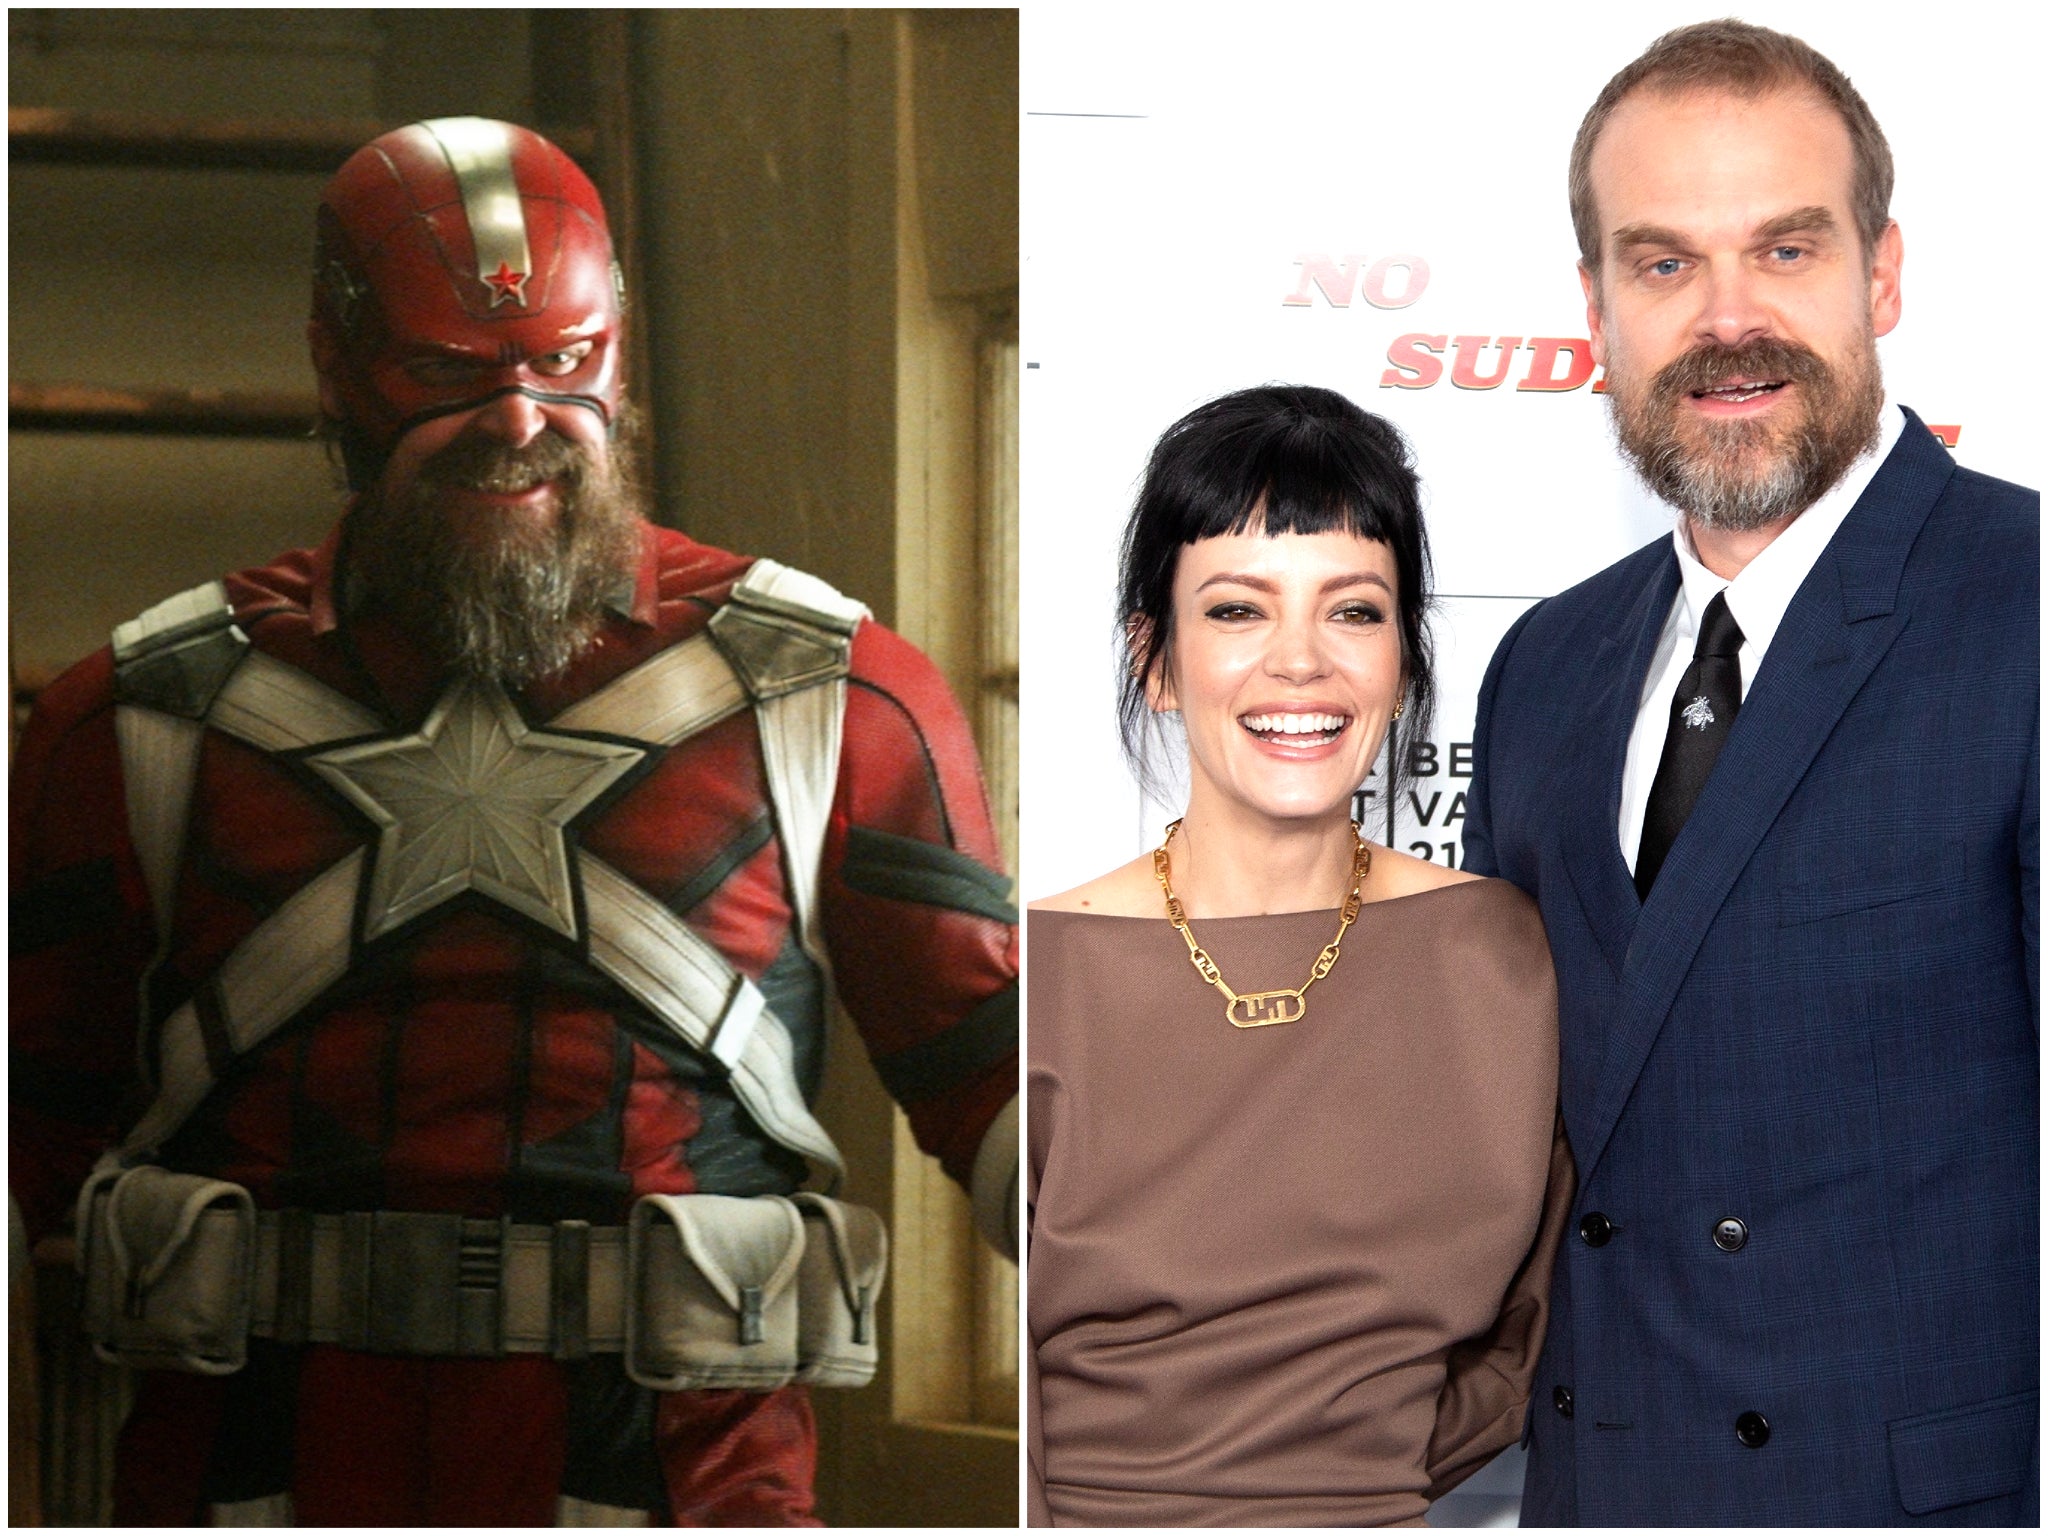 David Harbour in ‘Black Widow’ (left), and with wife Lily Allen at a film premiere last month (right)